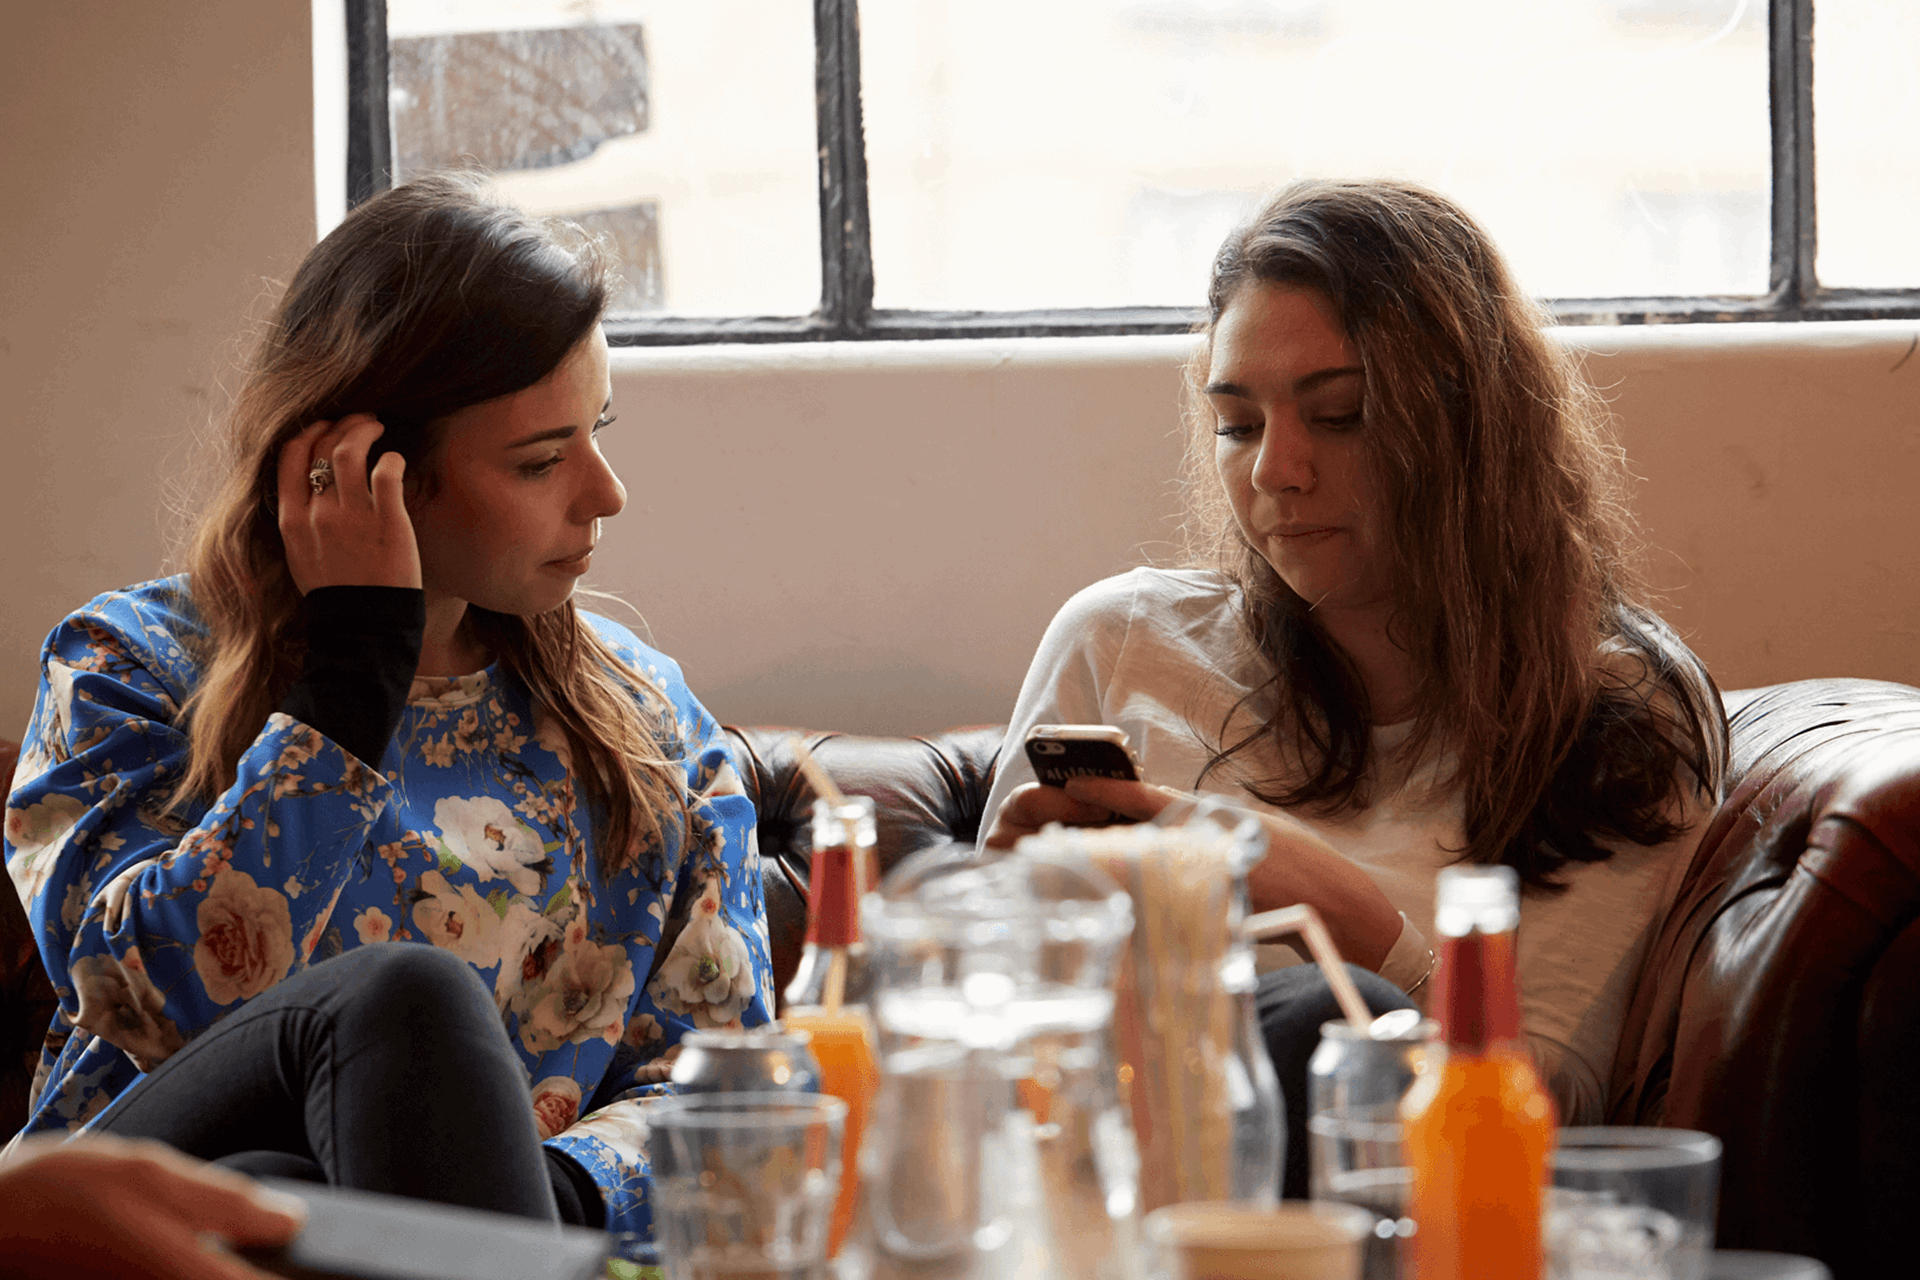 medium shot of two girls sitting on a couch one is using a phone while another girl is glancing on her phone bottles and drinks are on the table as foreground